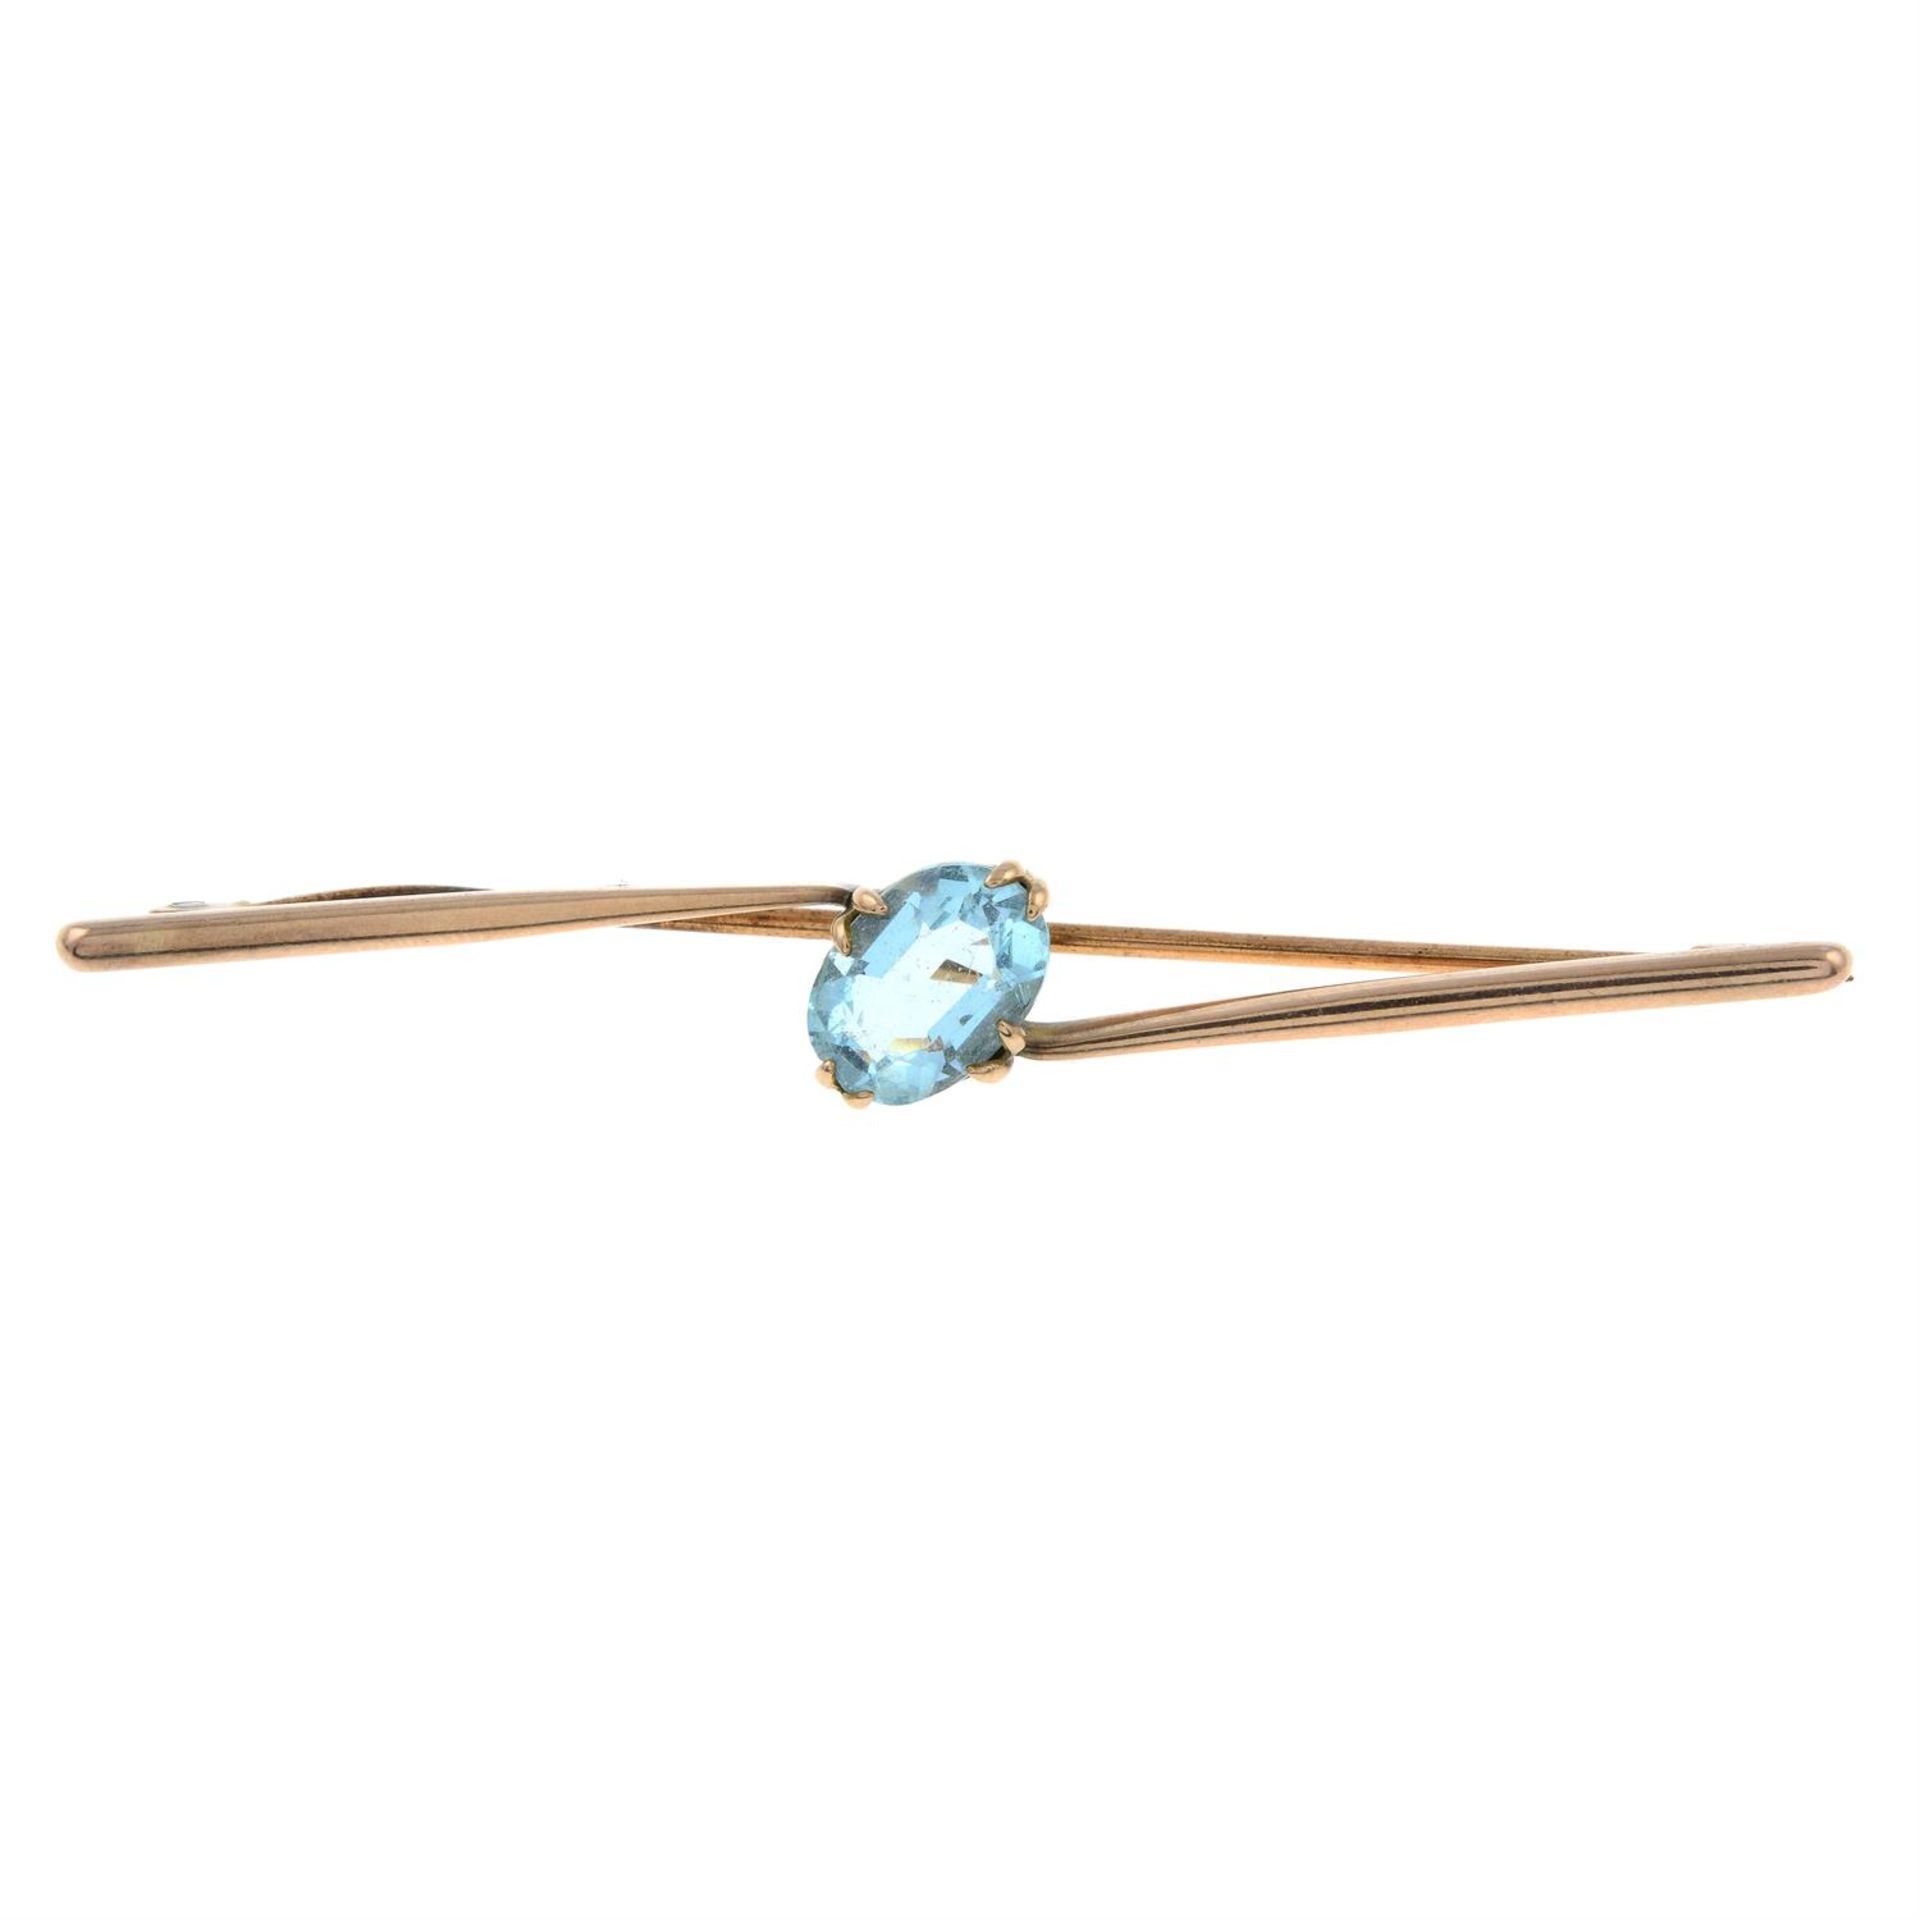 An early 20th century 9ct gold blue paste bar brooch.